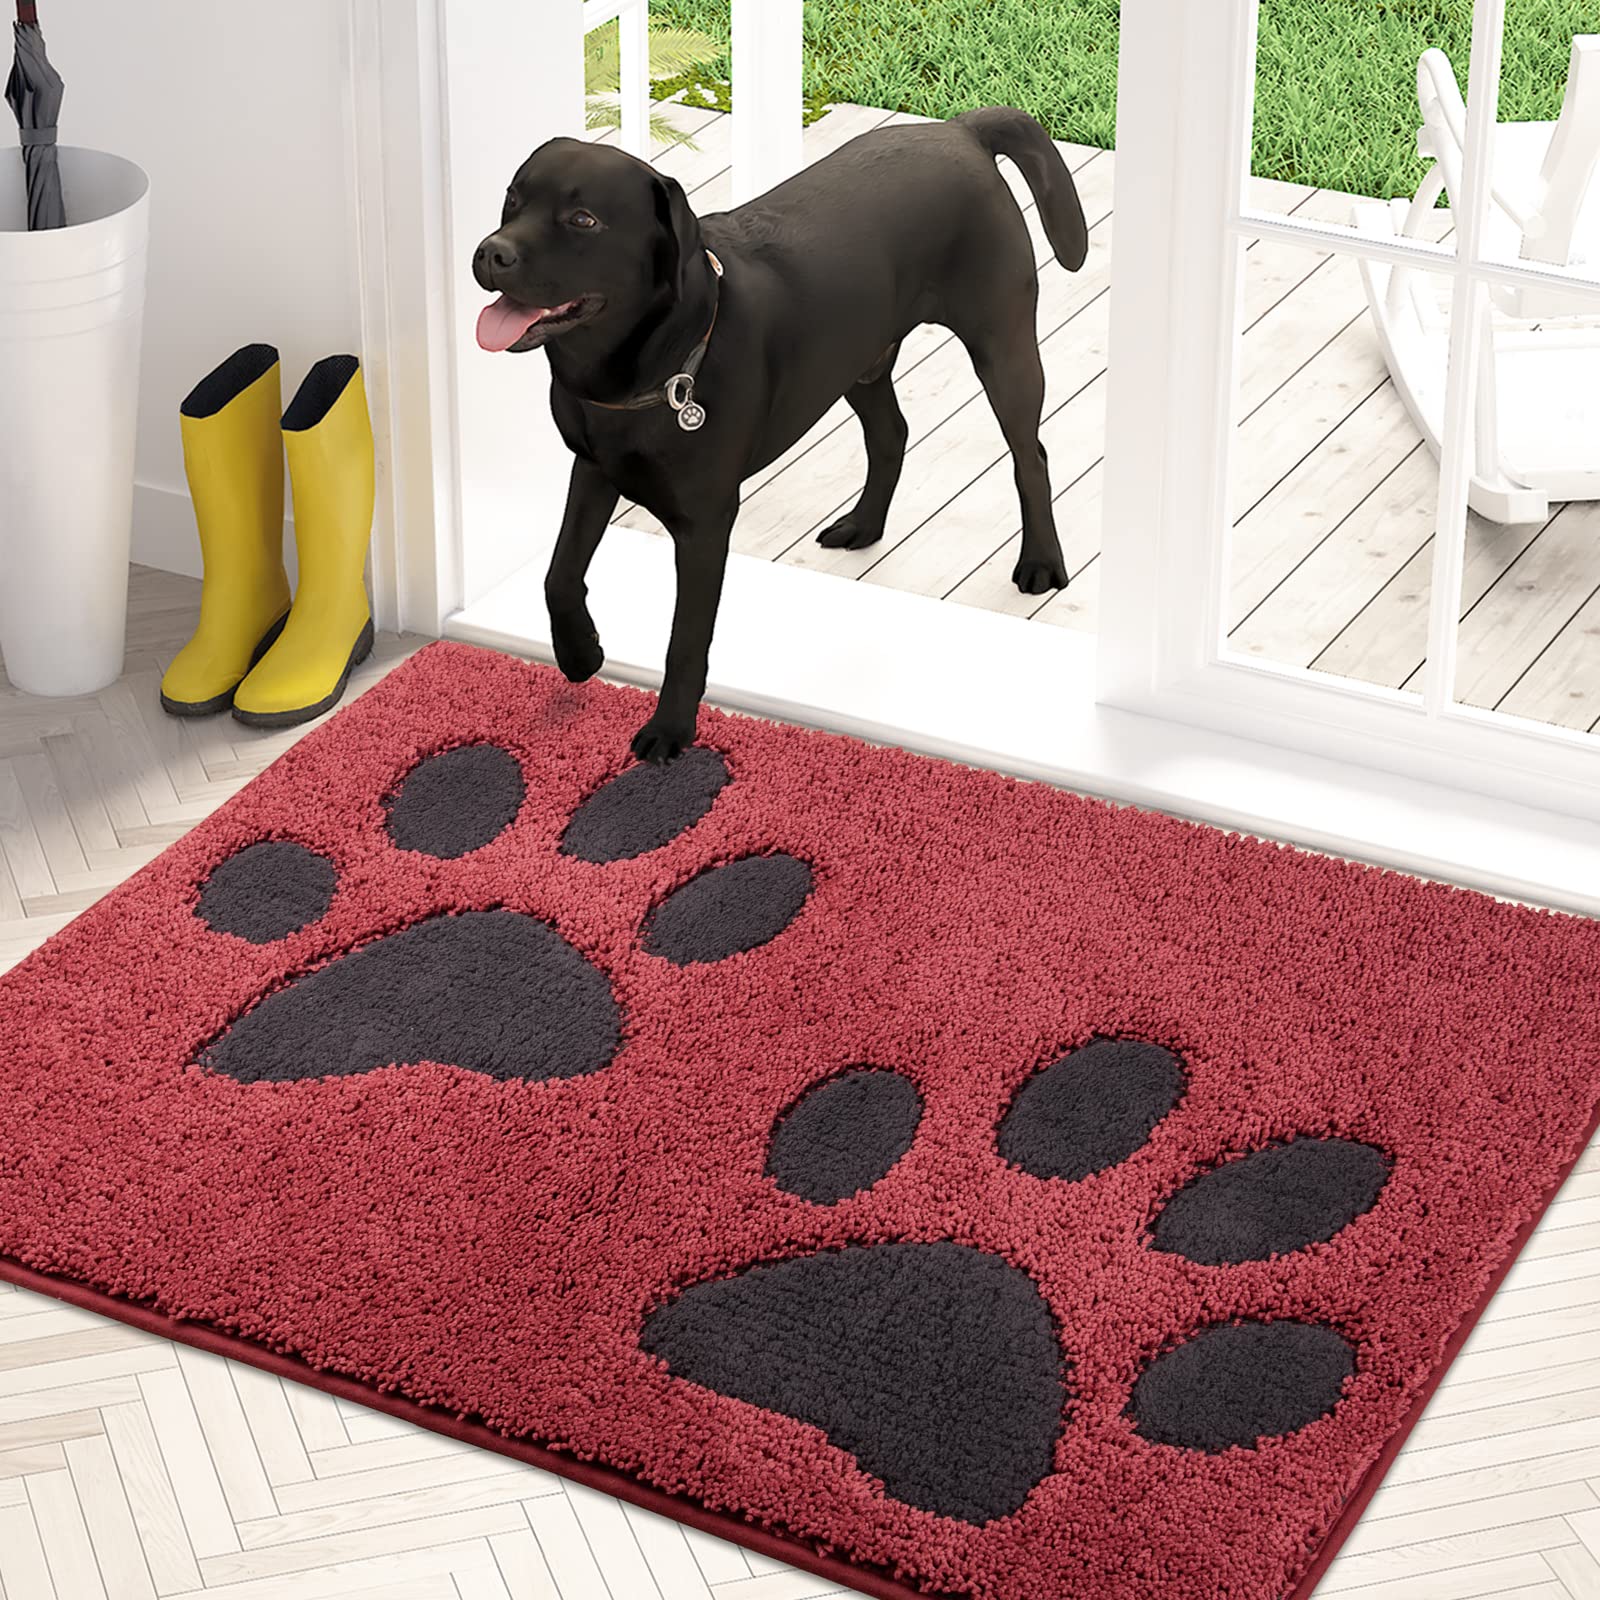 Soggy Doggy Doormats - Keep Wet Or Muddy Paw Prints Off The Floor